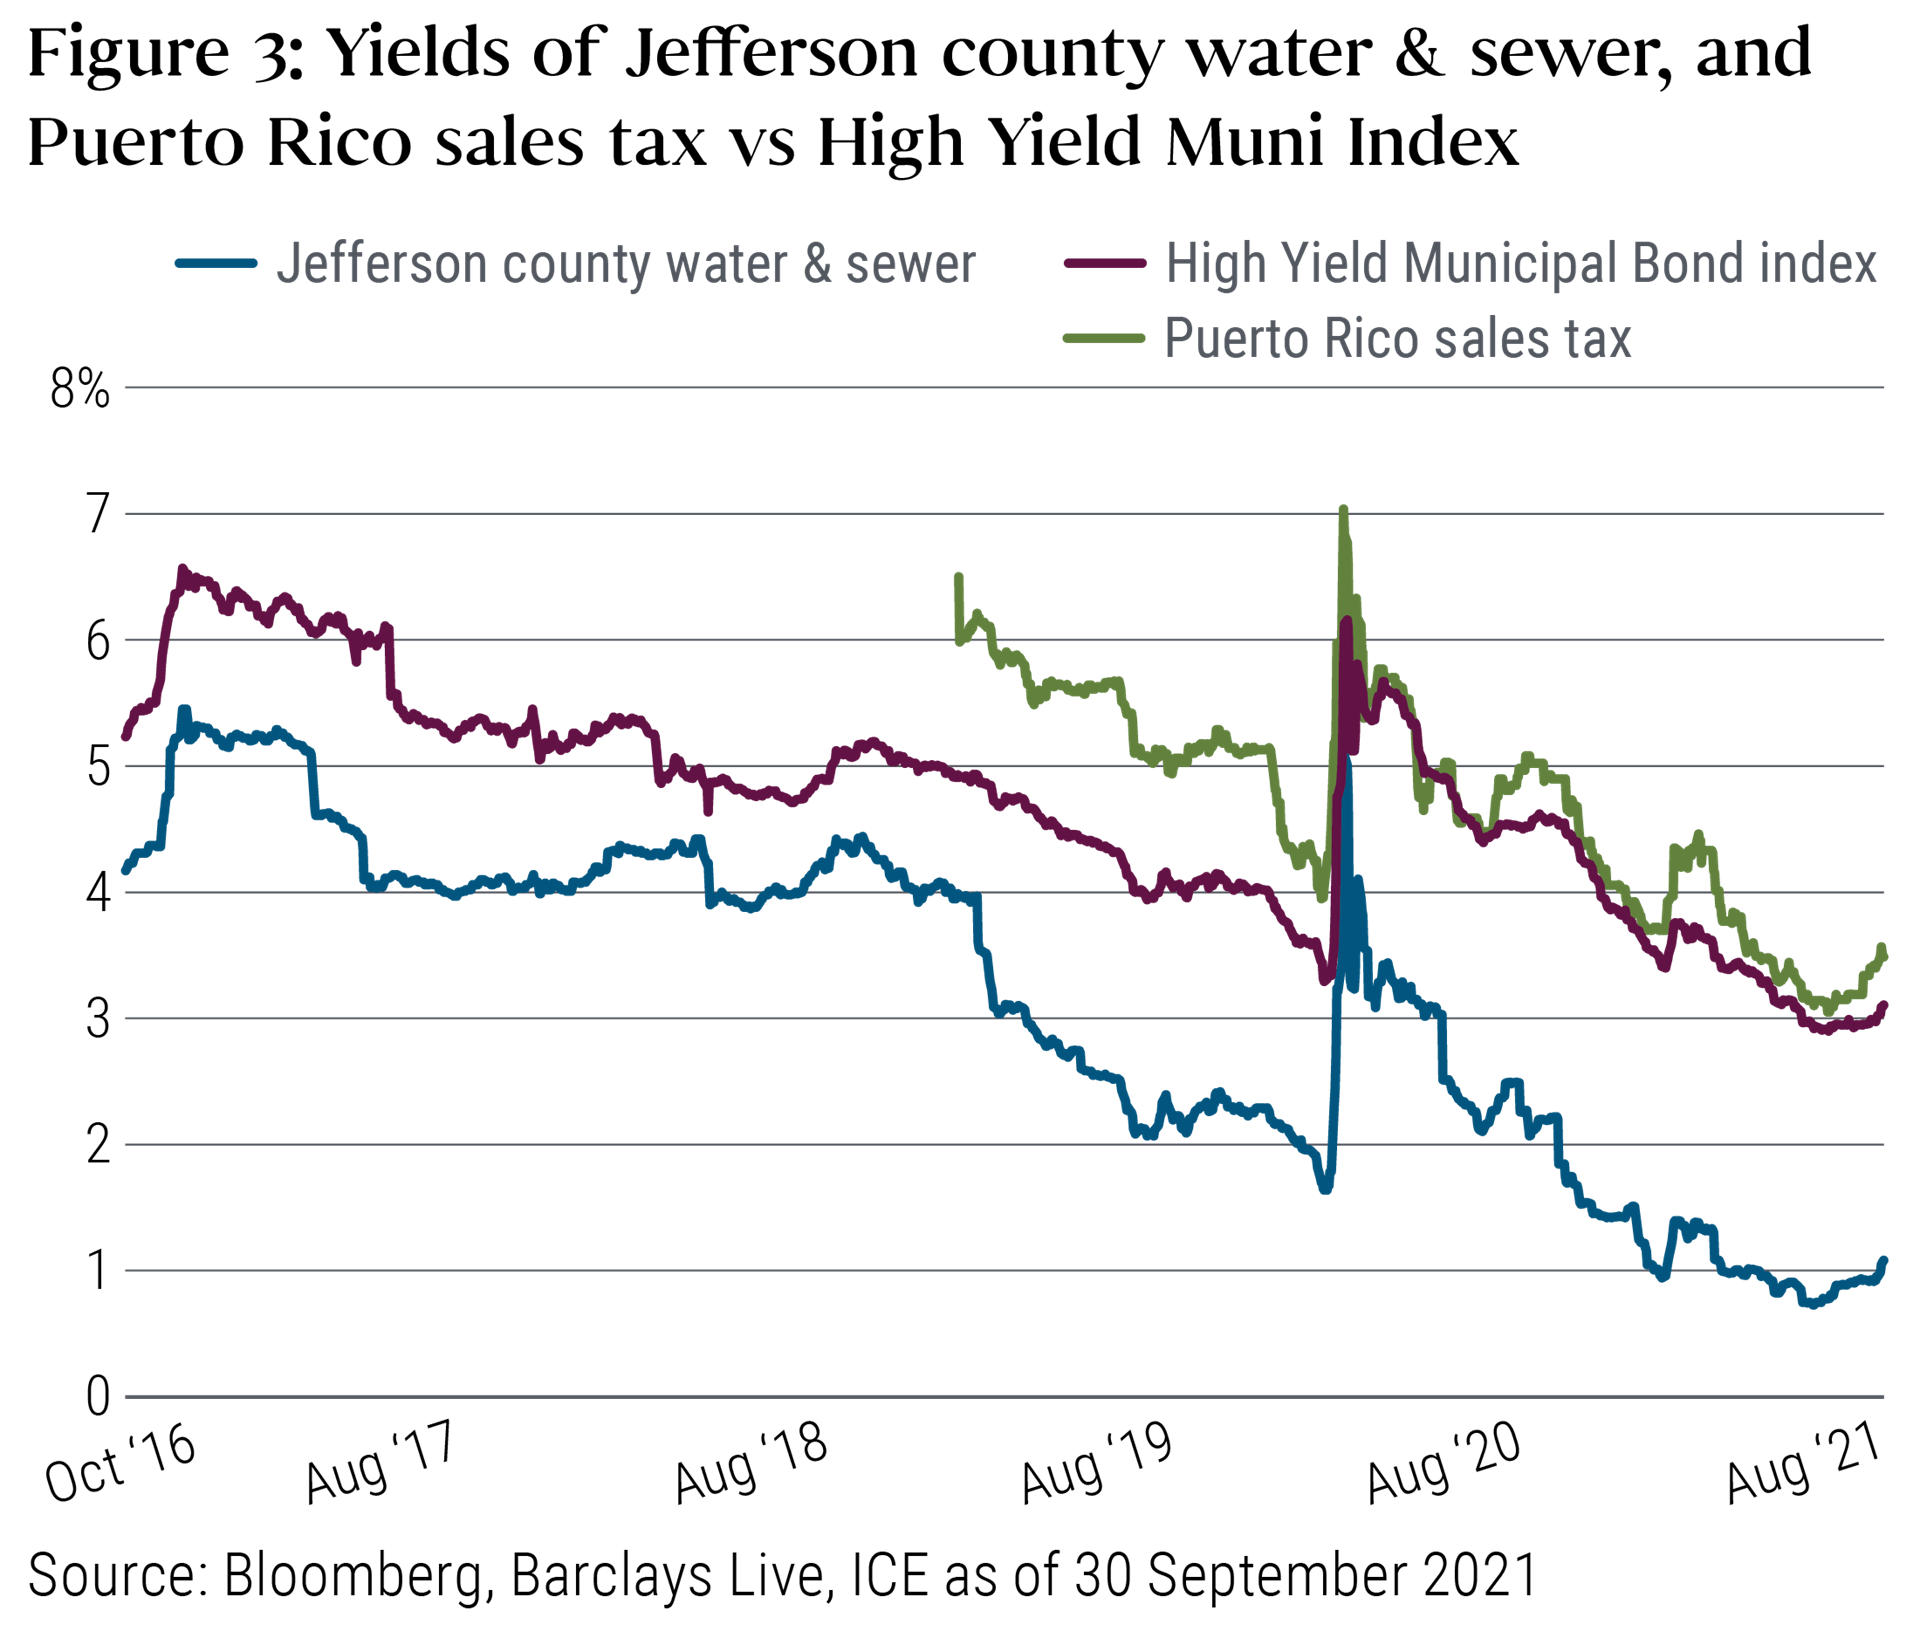 Figure 3. Yields of Jefferson County Water & Sewer, and Puerto Rico Sales Tax vs High Yield Muni Index